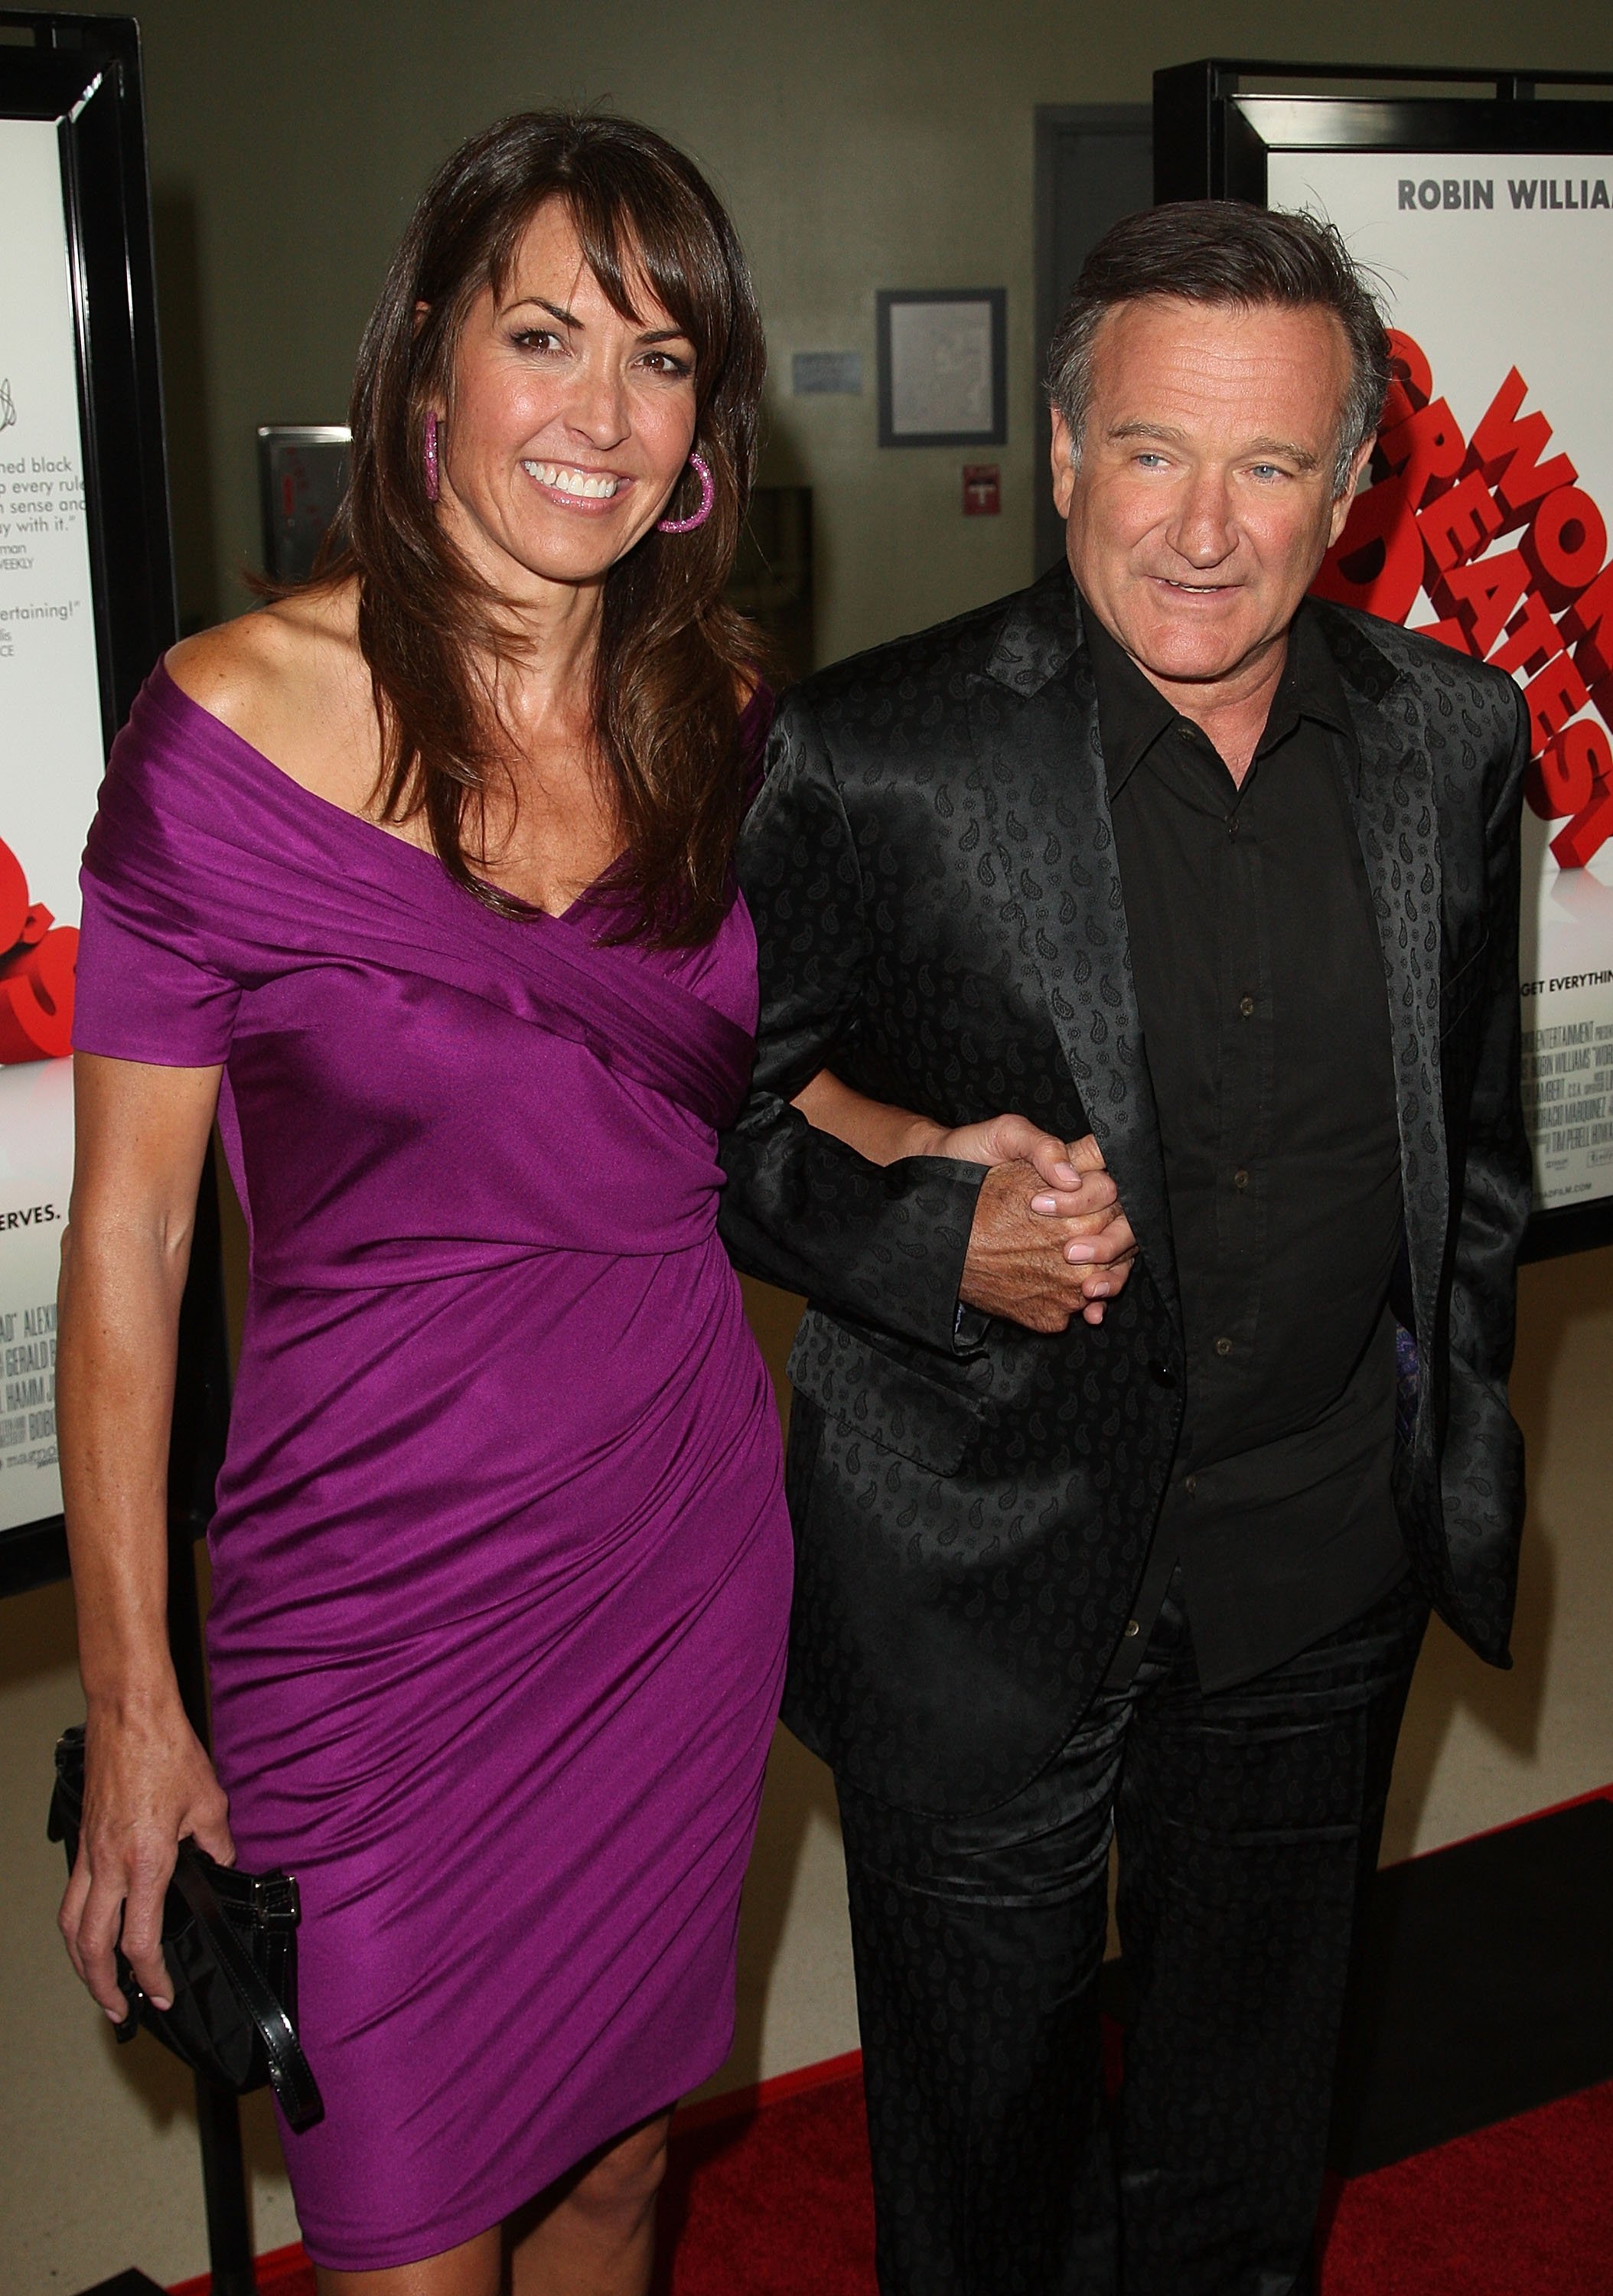 Robin Williams and Susan Schneider on August 13, 2009 in Los Angeles, California | Photo: Getty Images